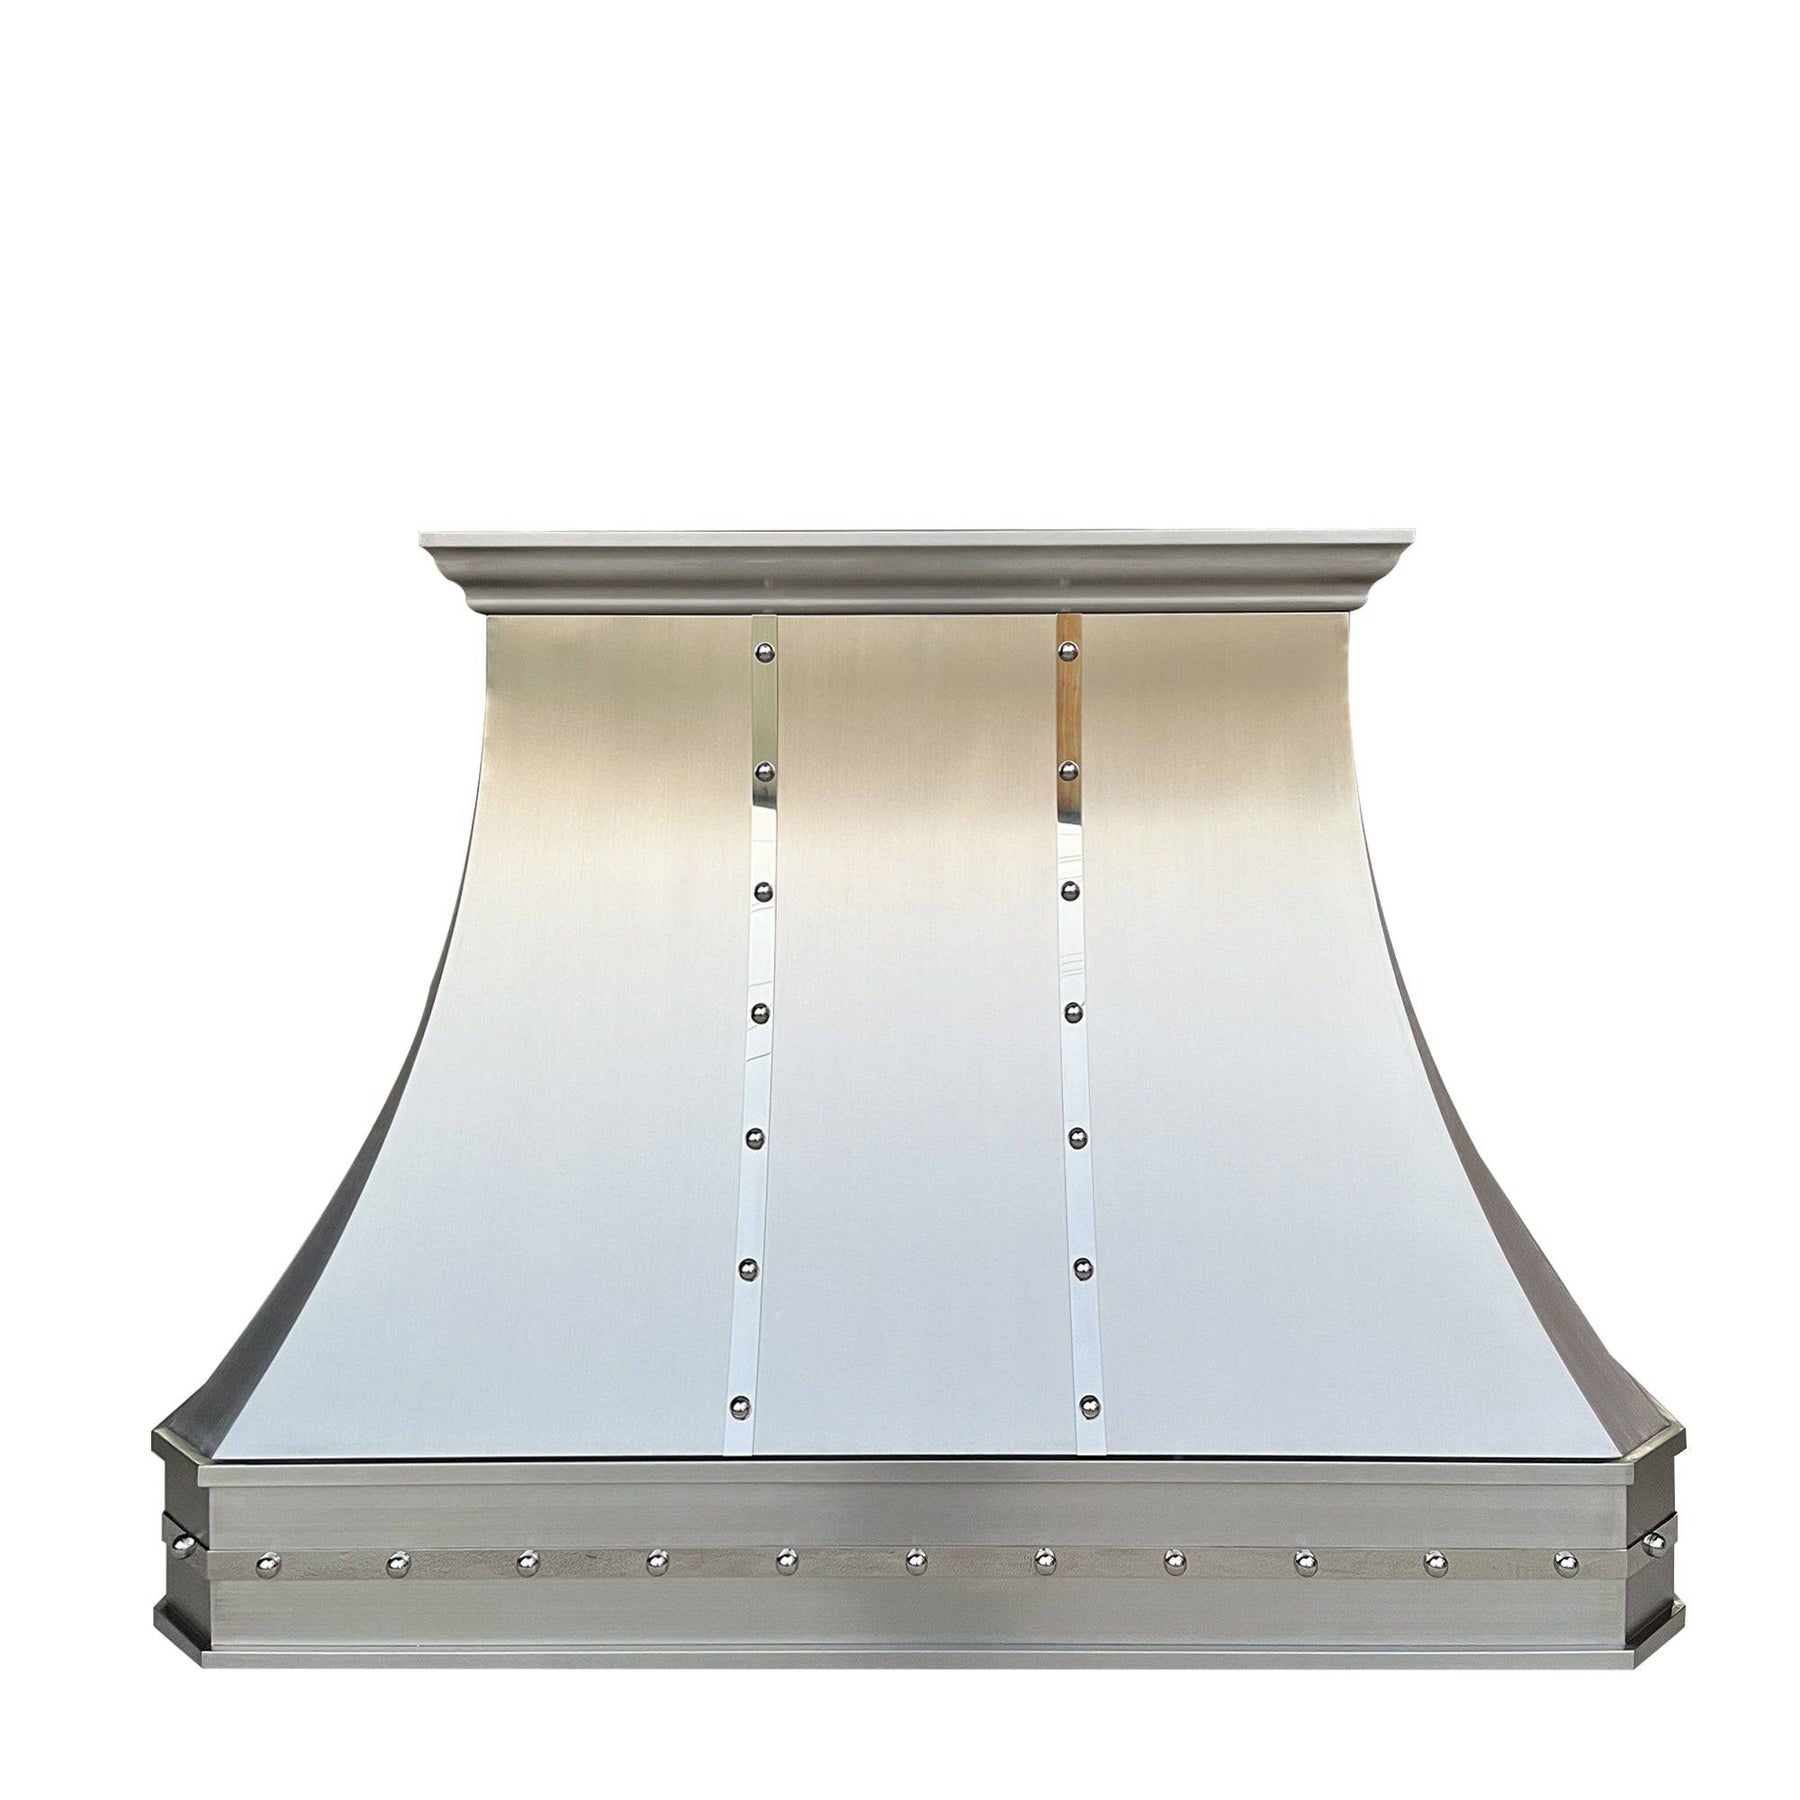 Fobest Custom Handcrafted Stainless Steel Range Hood FSS-41 - Stainless Steel Range Hood-Fobest Appliance